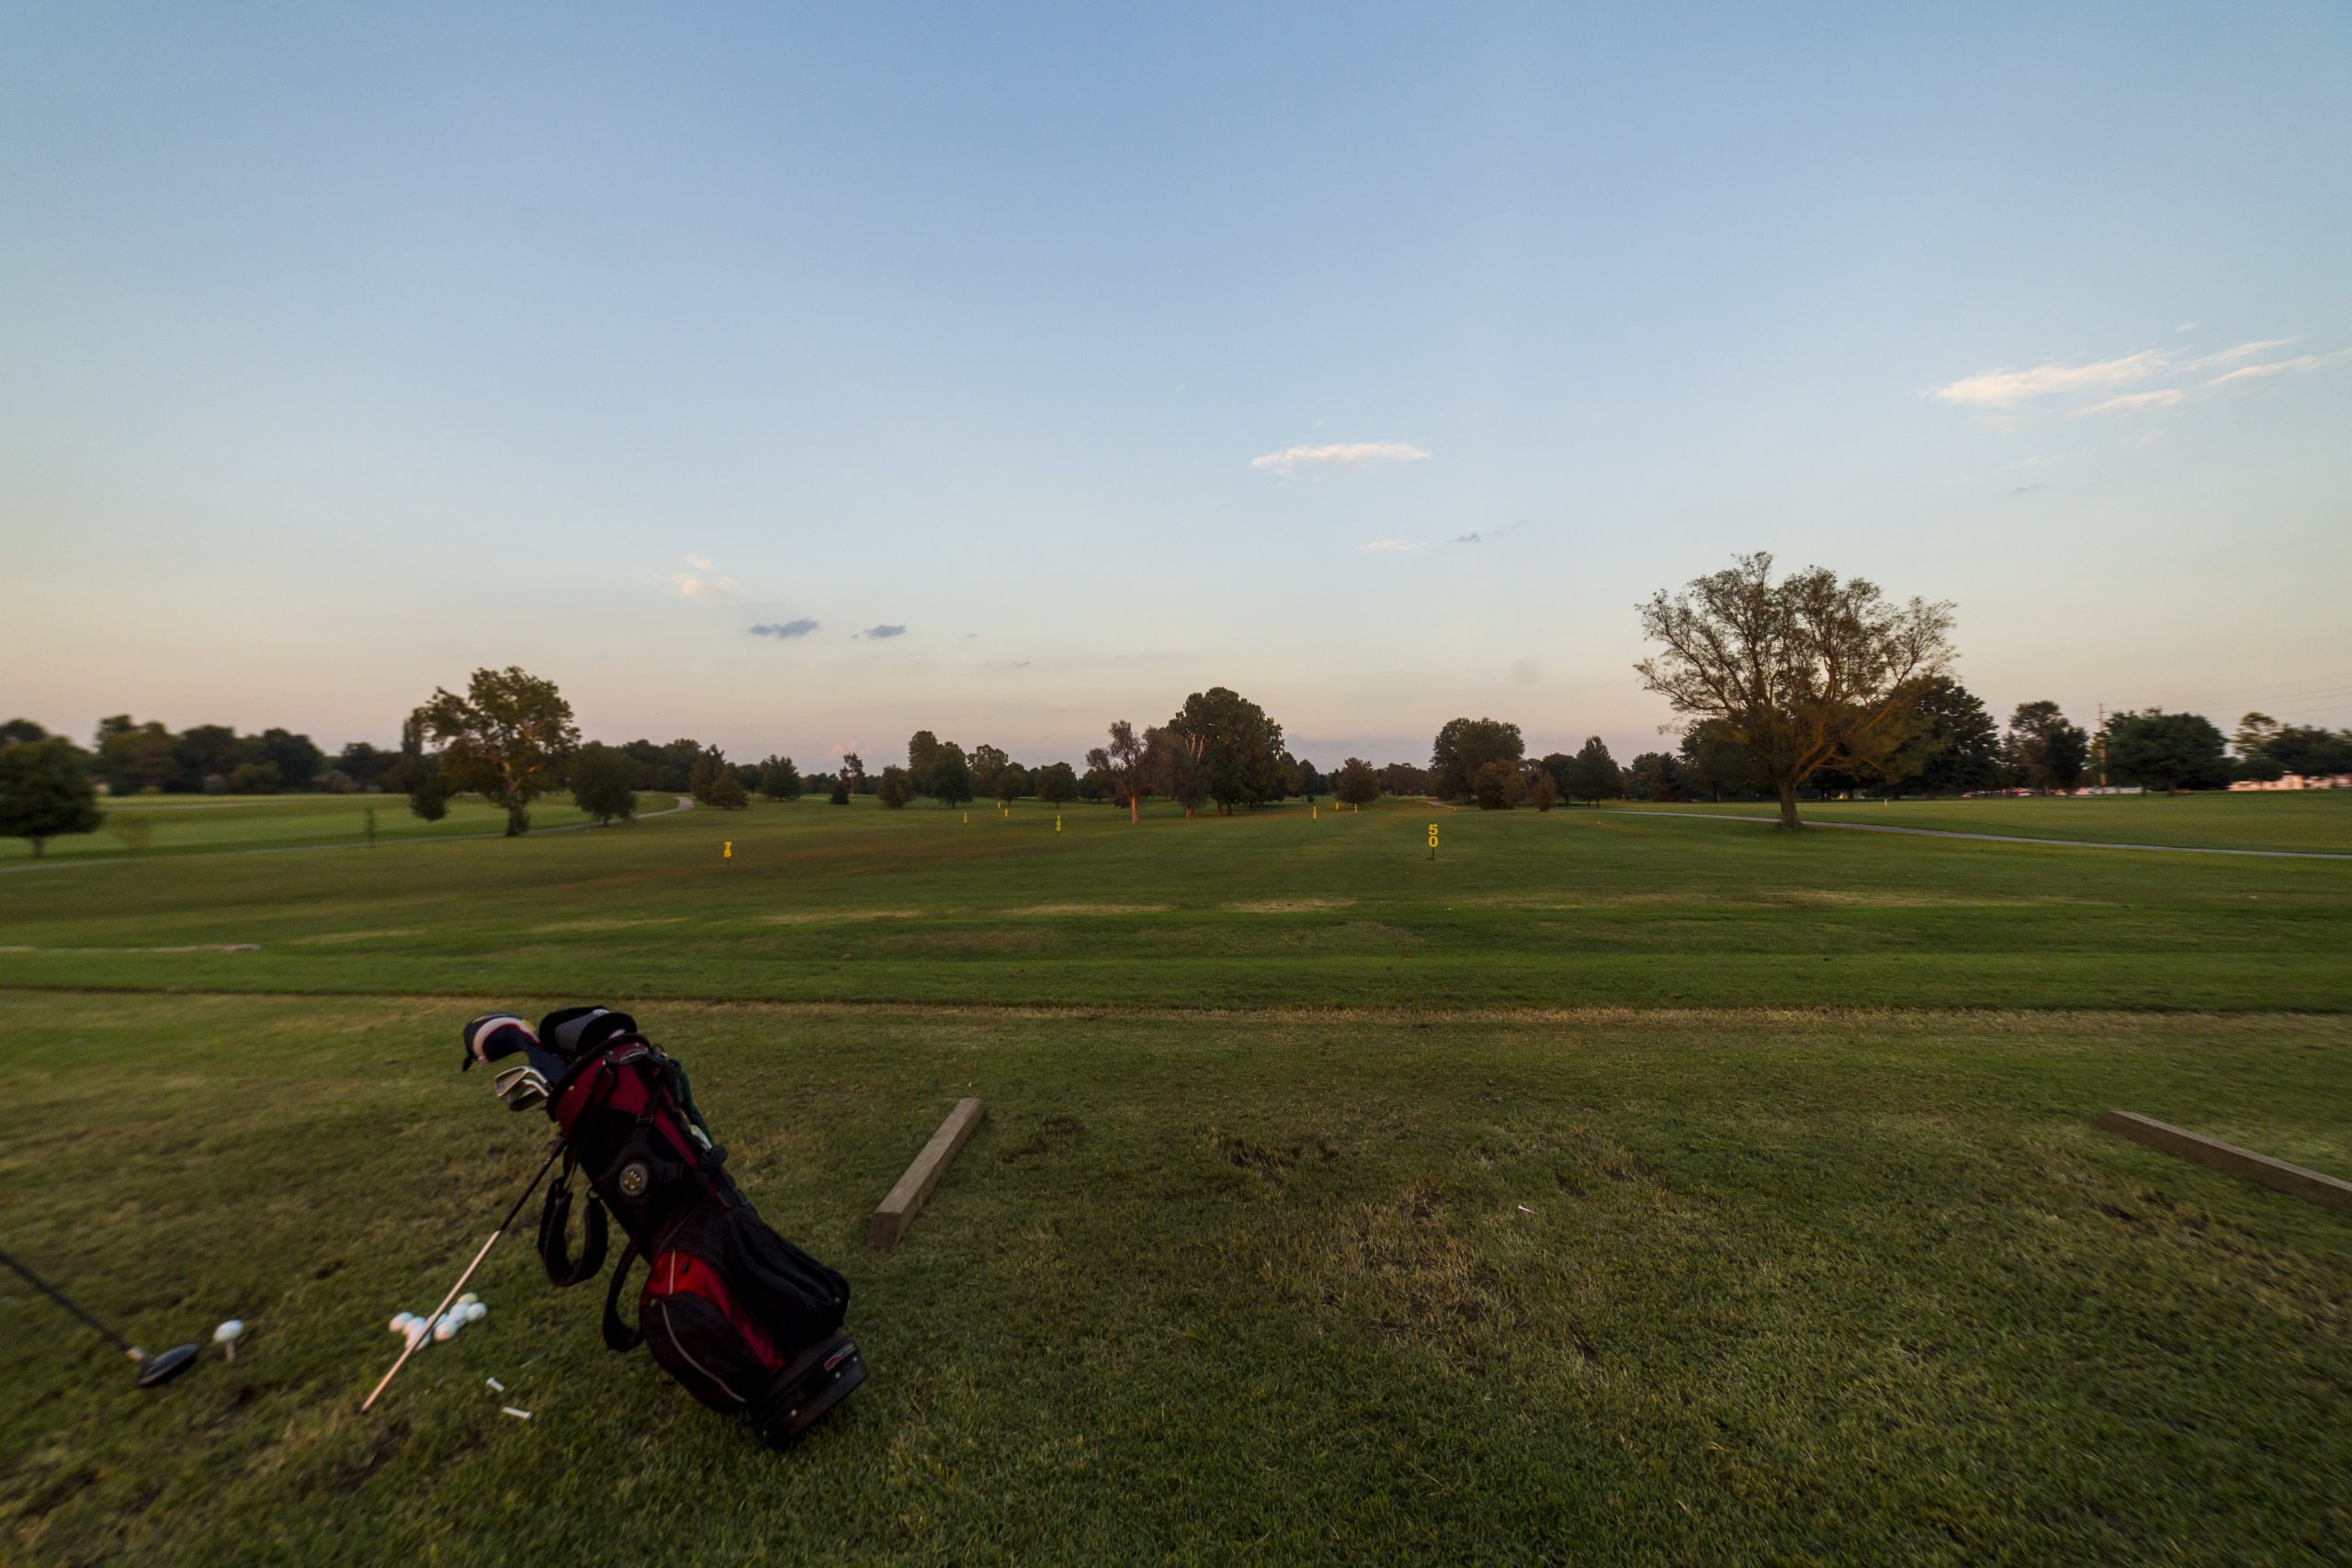 The Best Driving Range in Springfield, MO